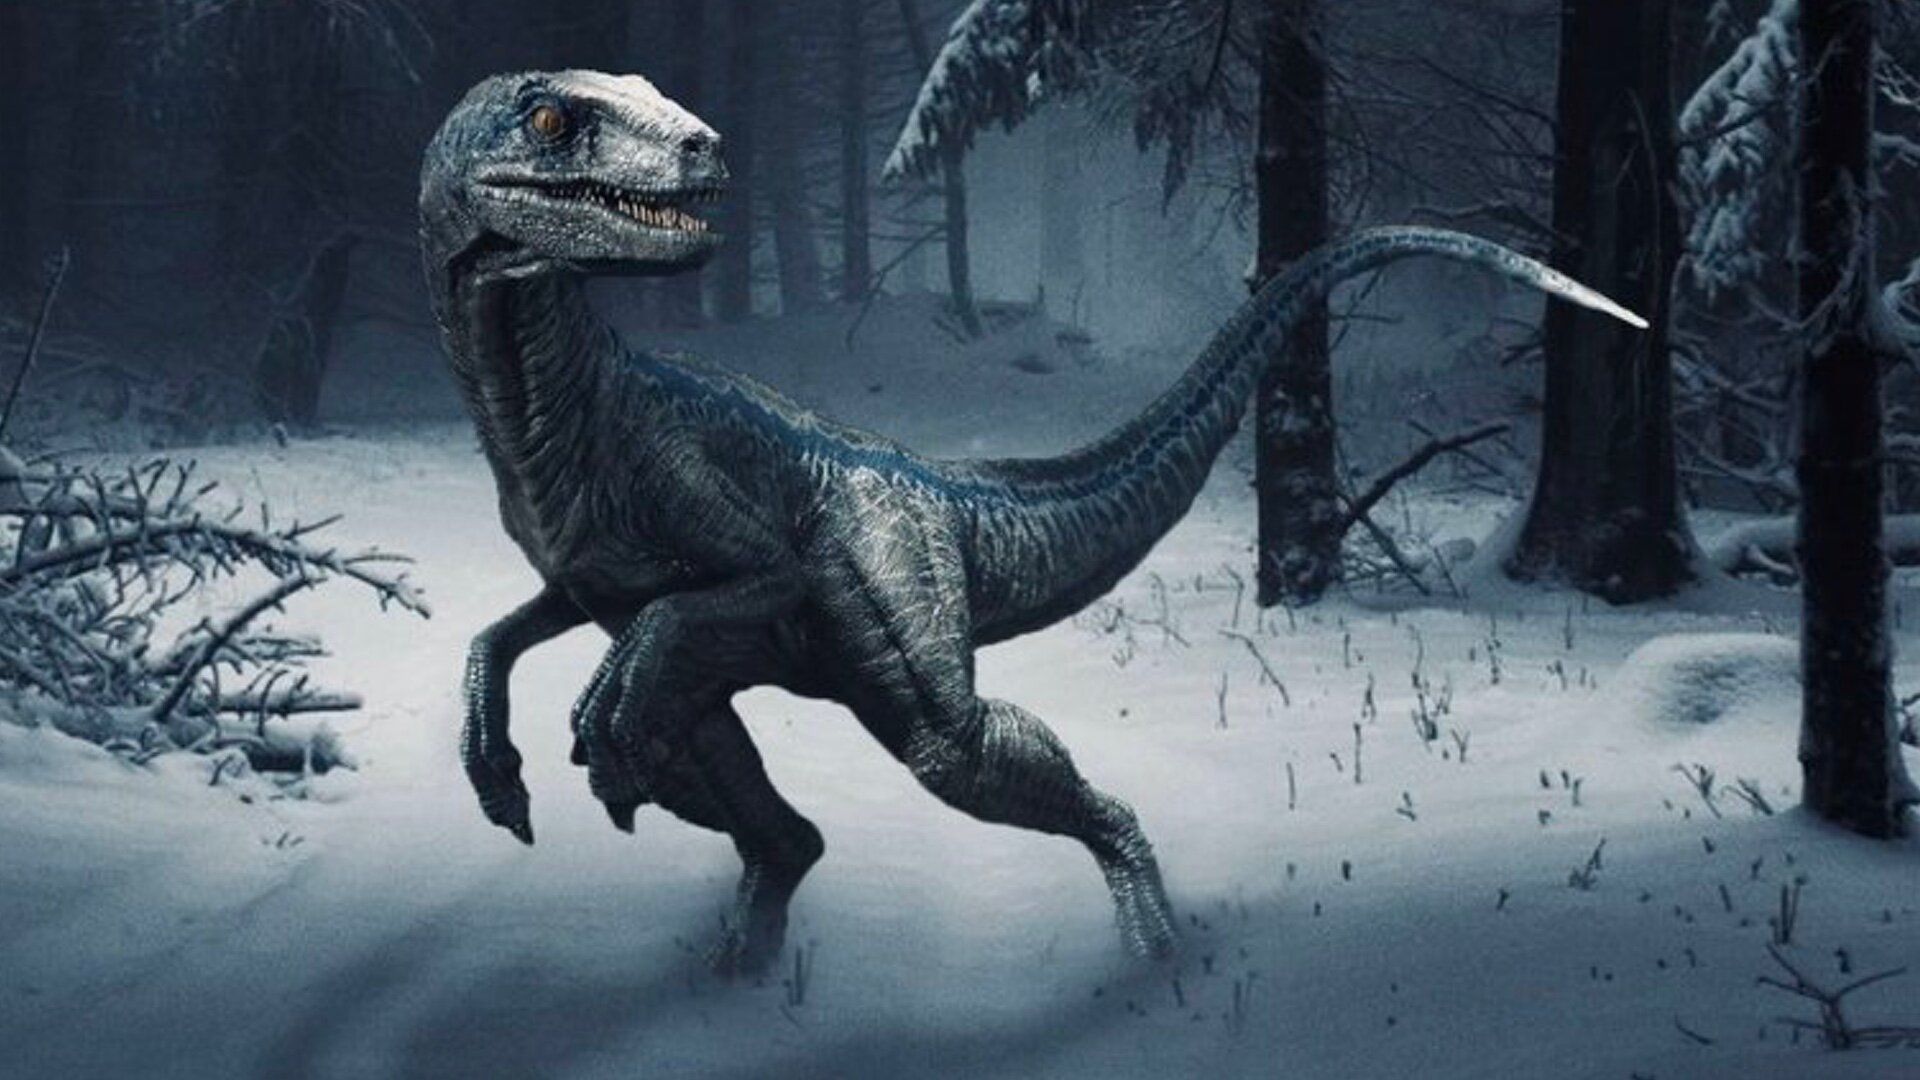 The Set Photo of JURASSIC WORLD: DOMINION Comes With a Snowy Setting